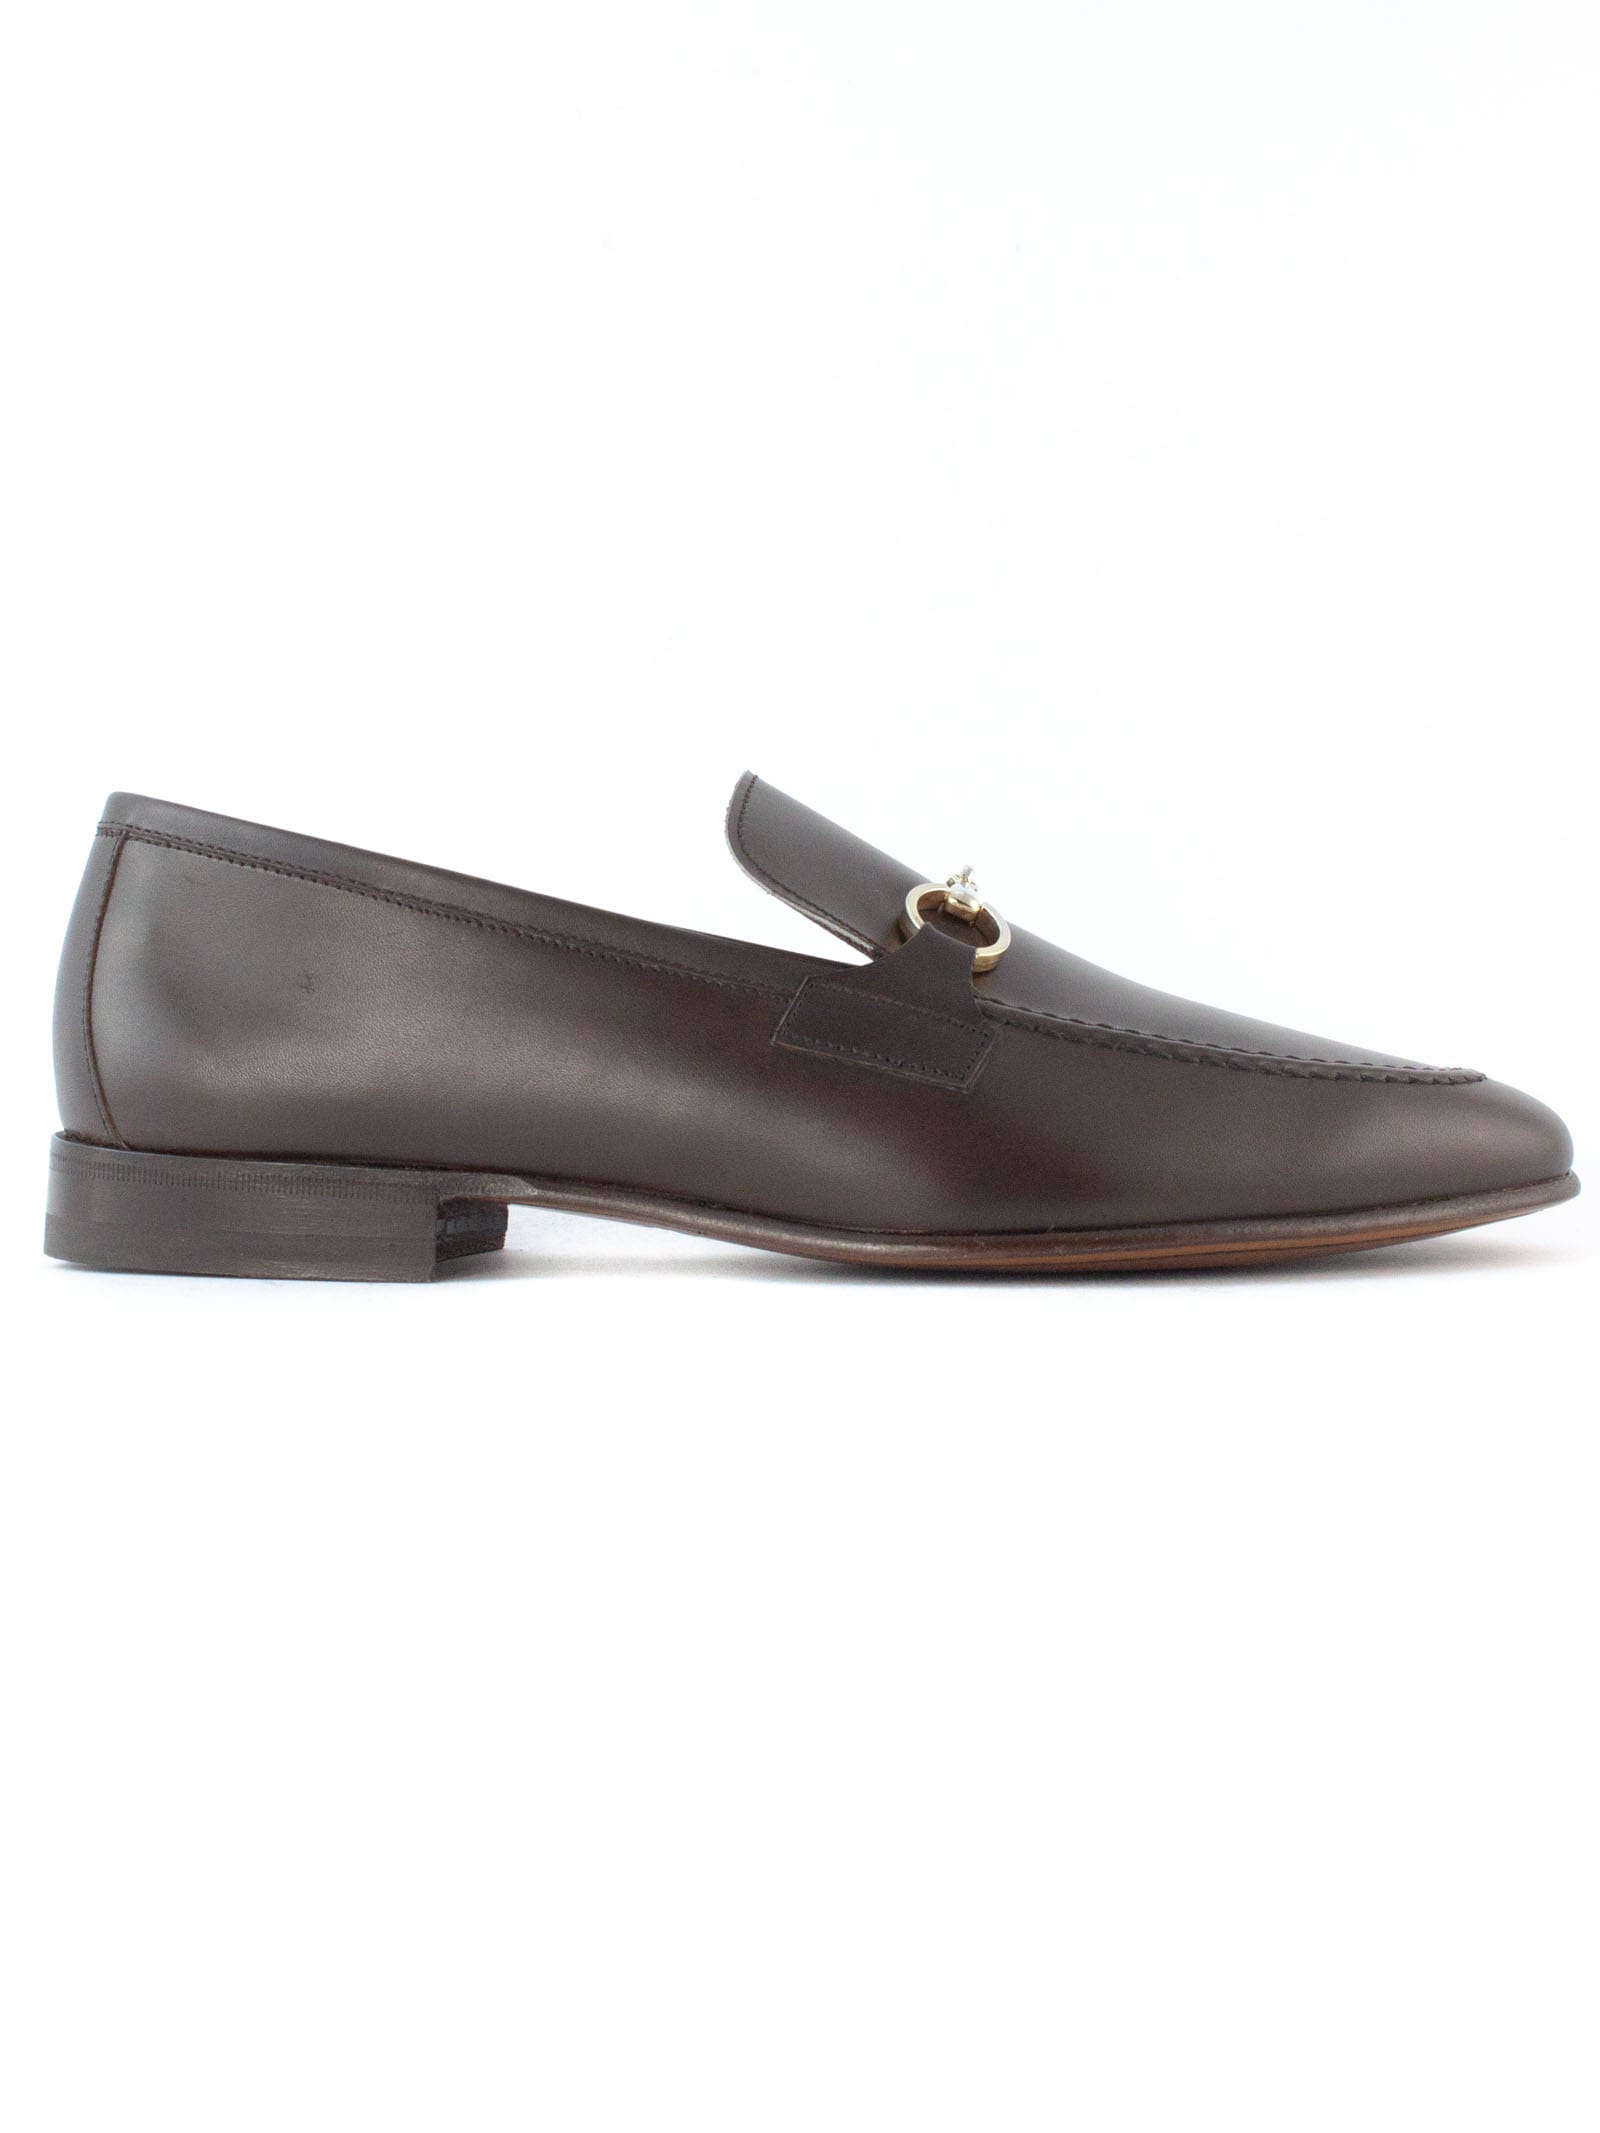 1707 Brown Leather Loafer